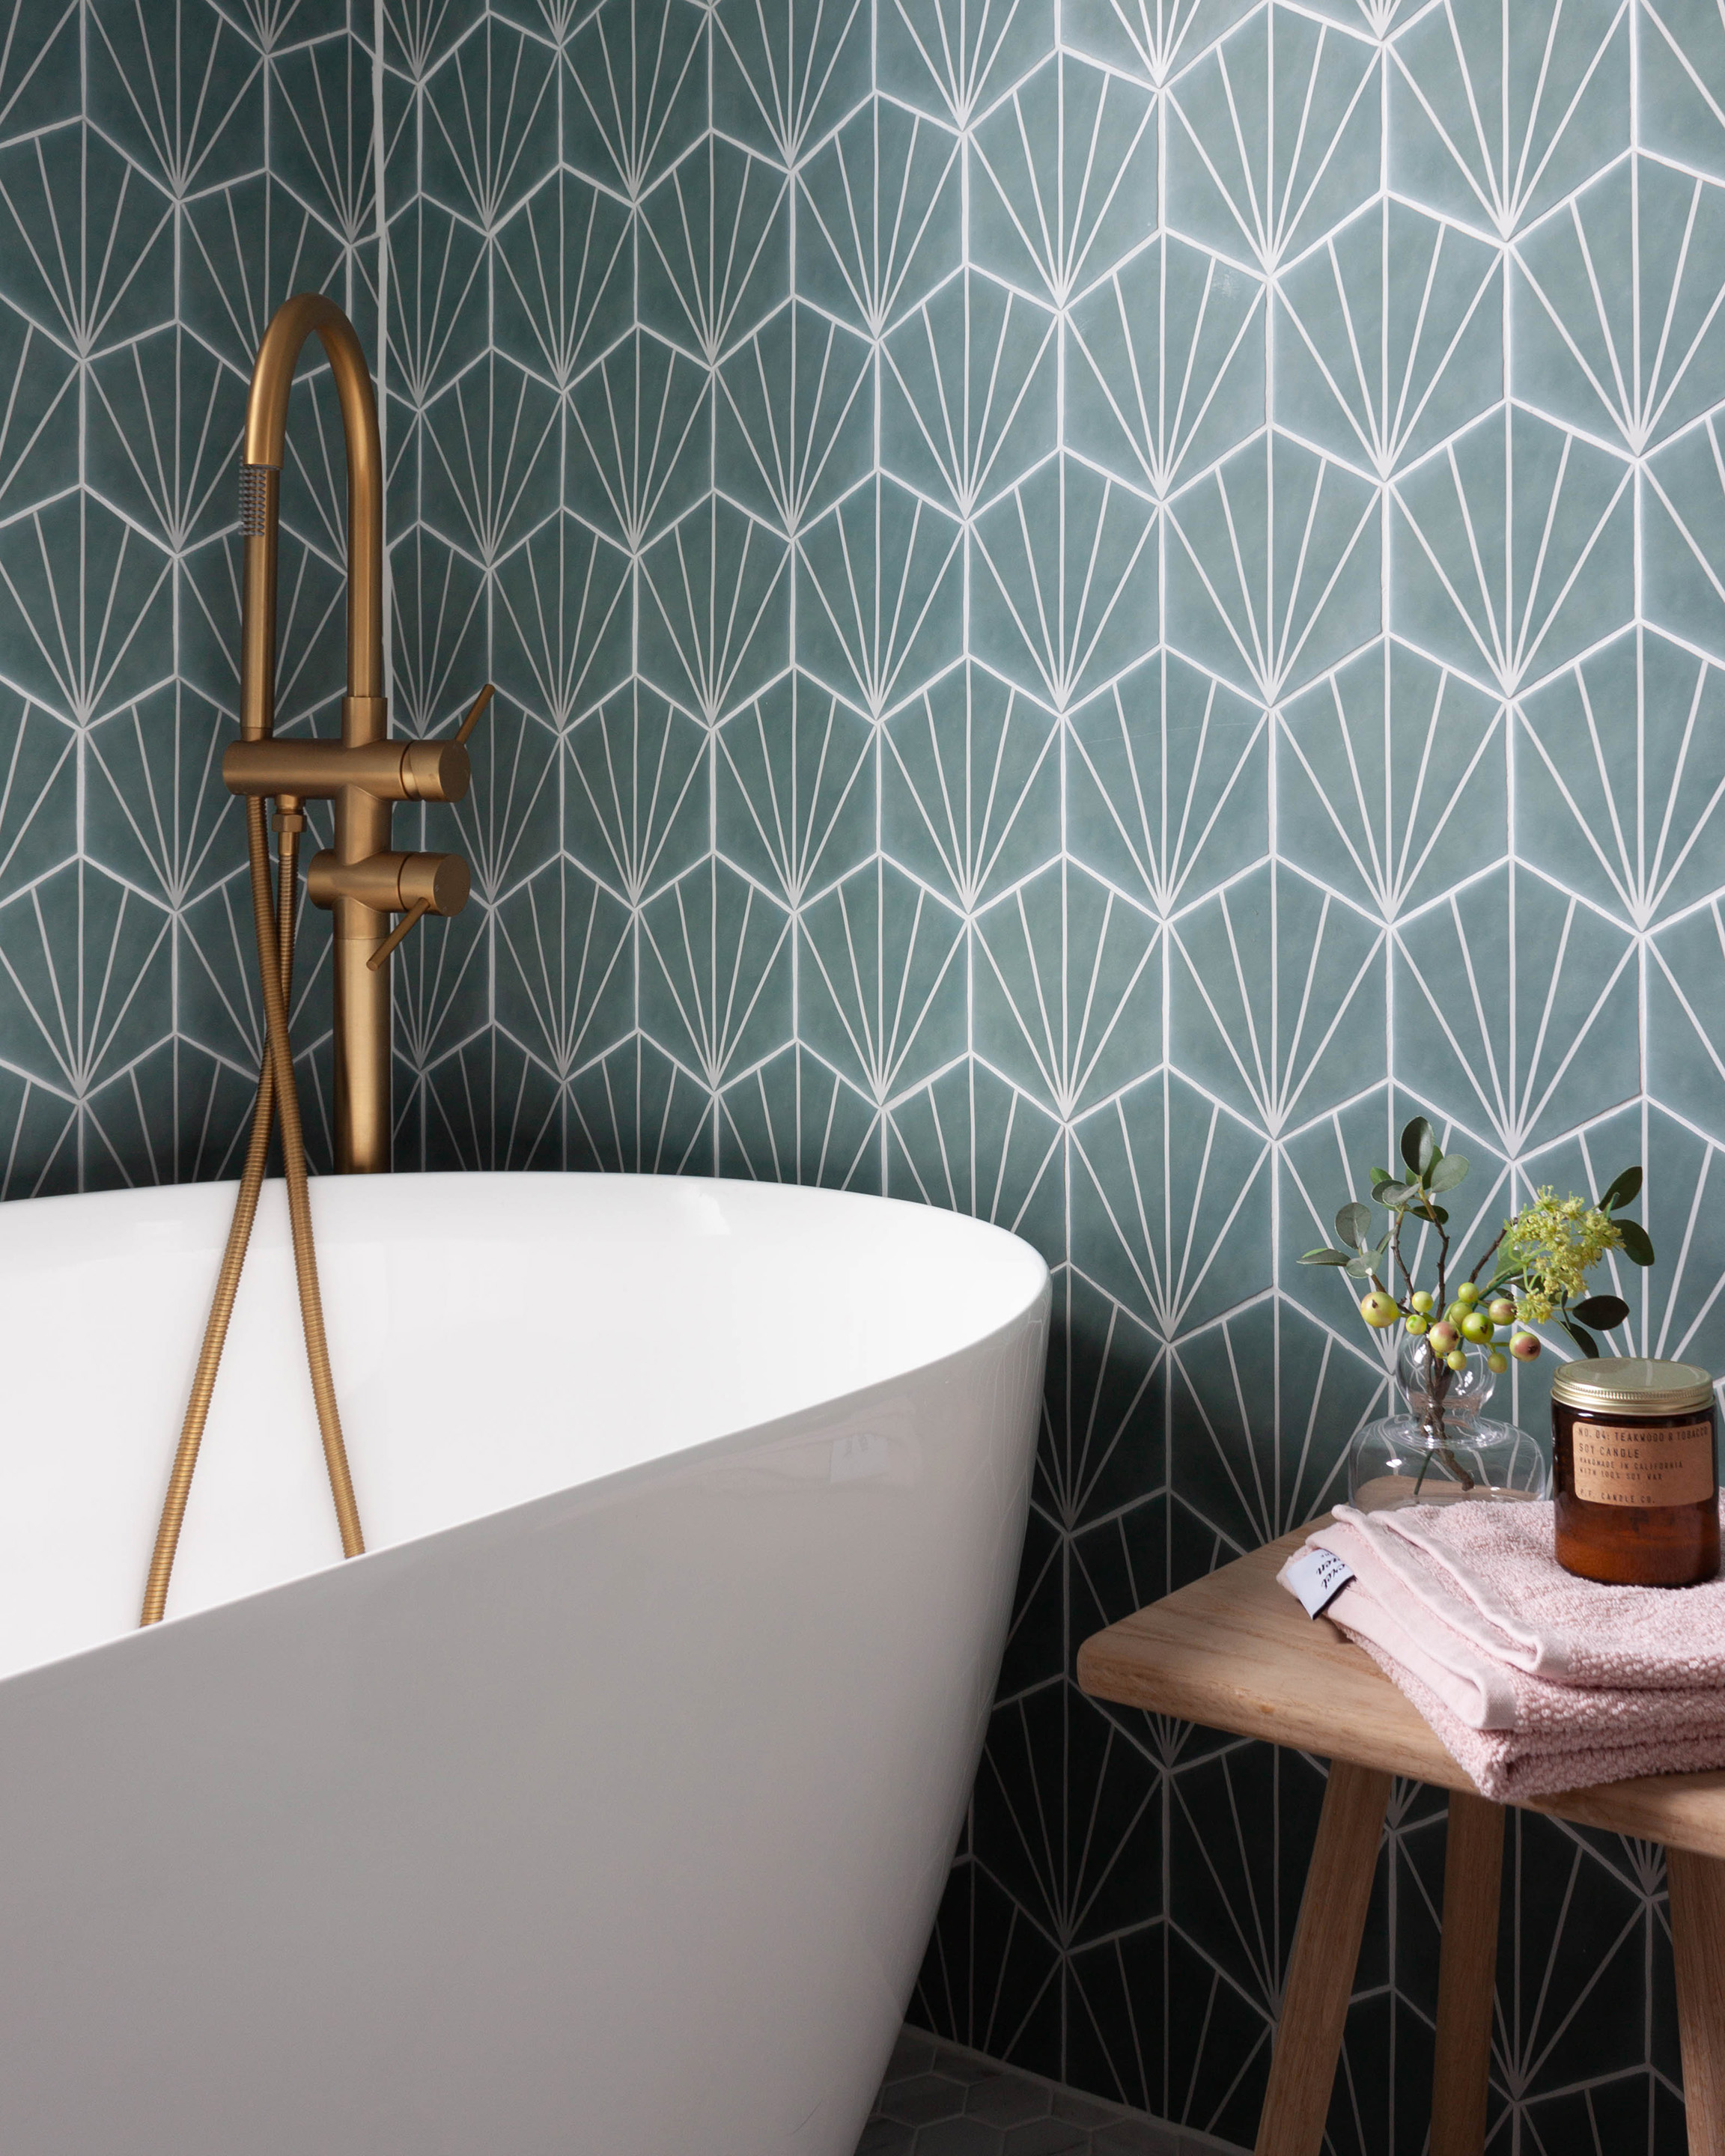 An elegant white freestanding bath with a gold floor mounted bath filler and shower head, set against vibrant teal hexagonal tiles with a white starburst pattern. A section of a bathroom design in Leamington Spa.